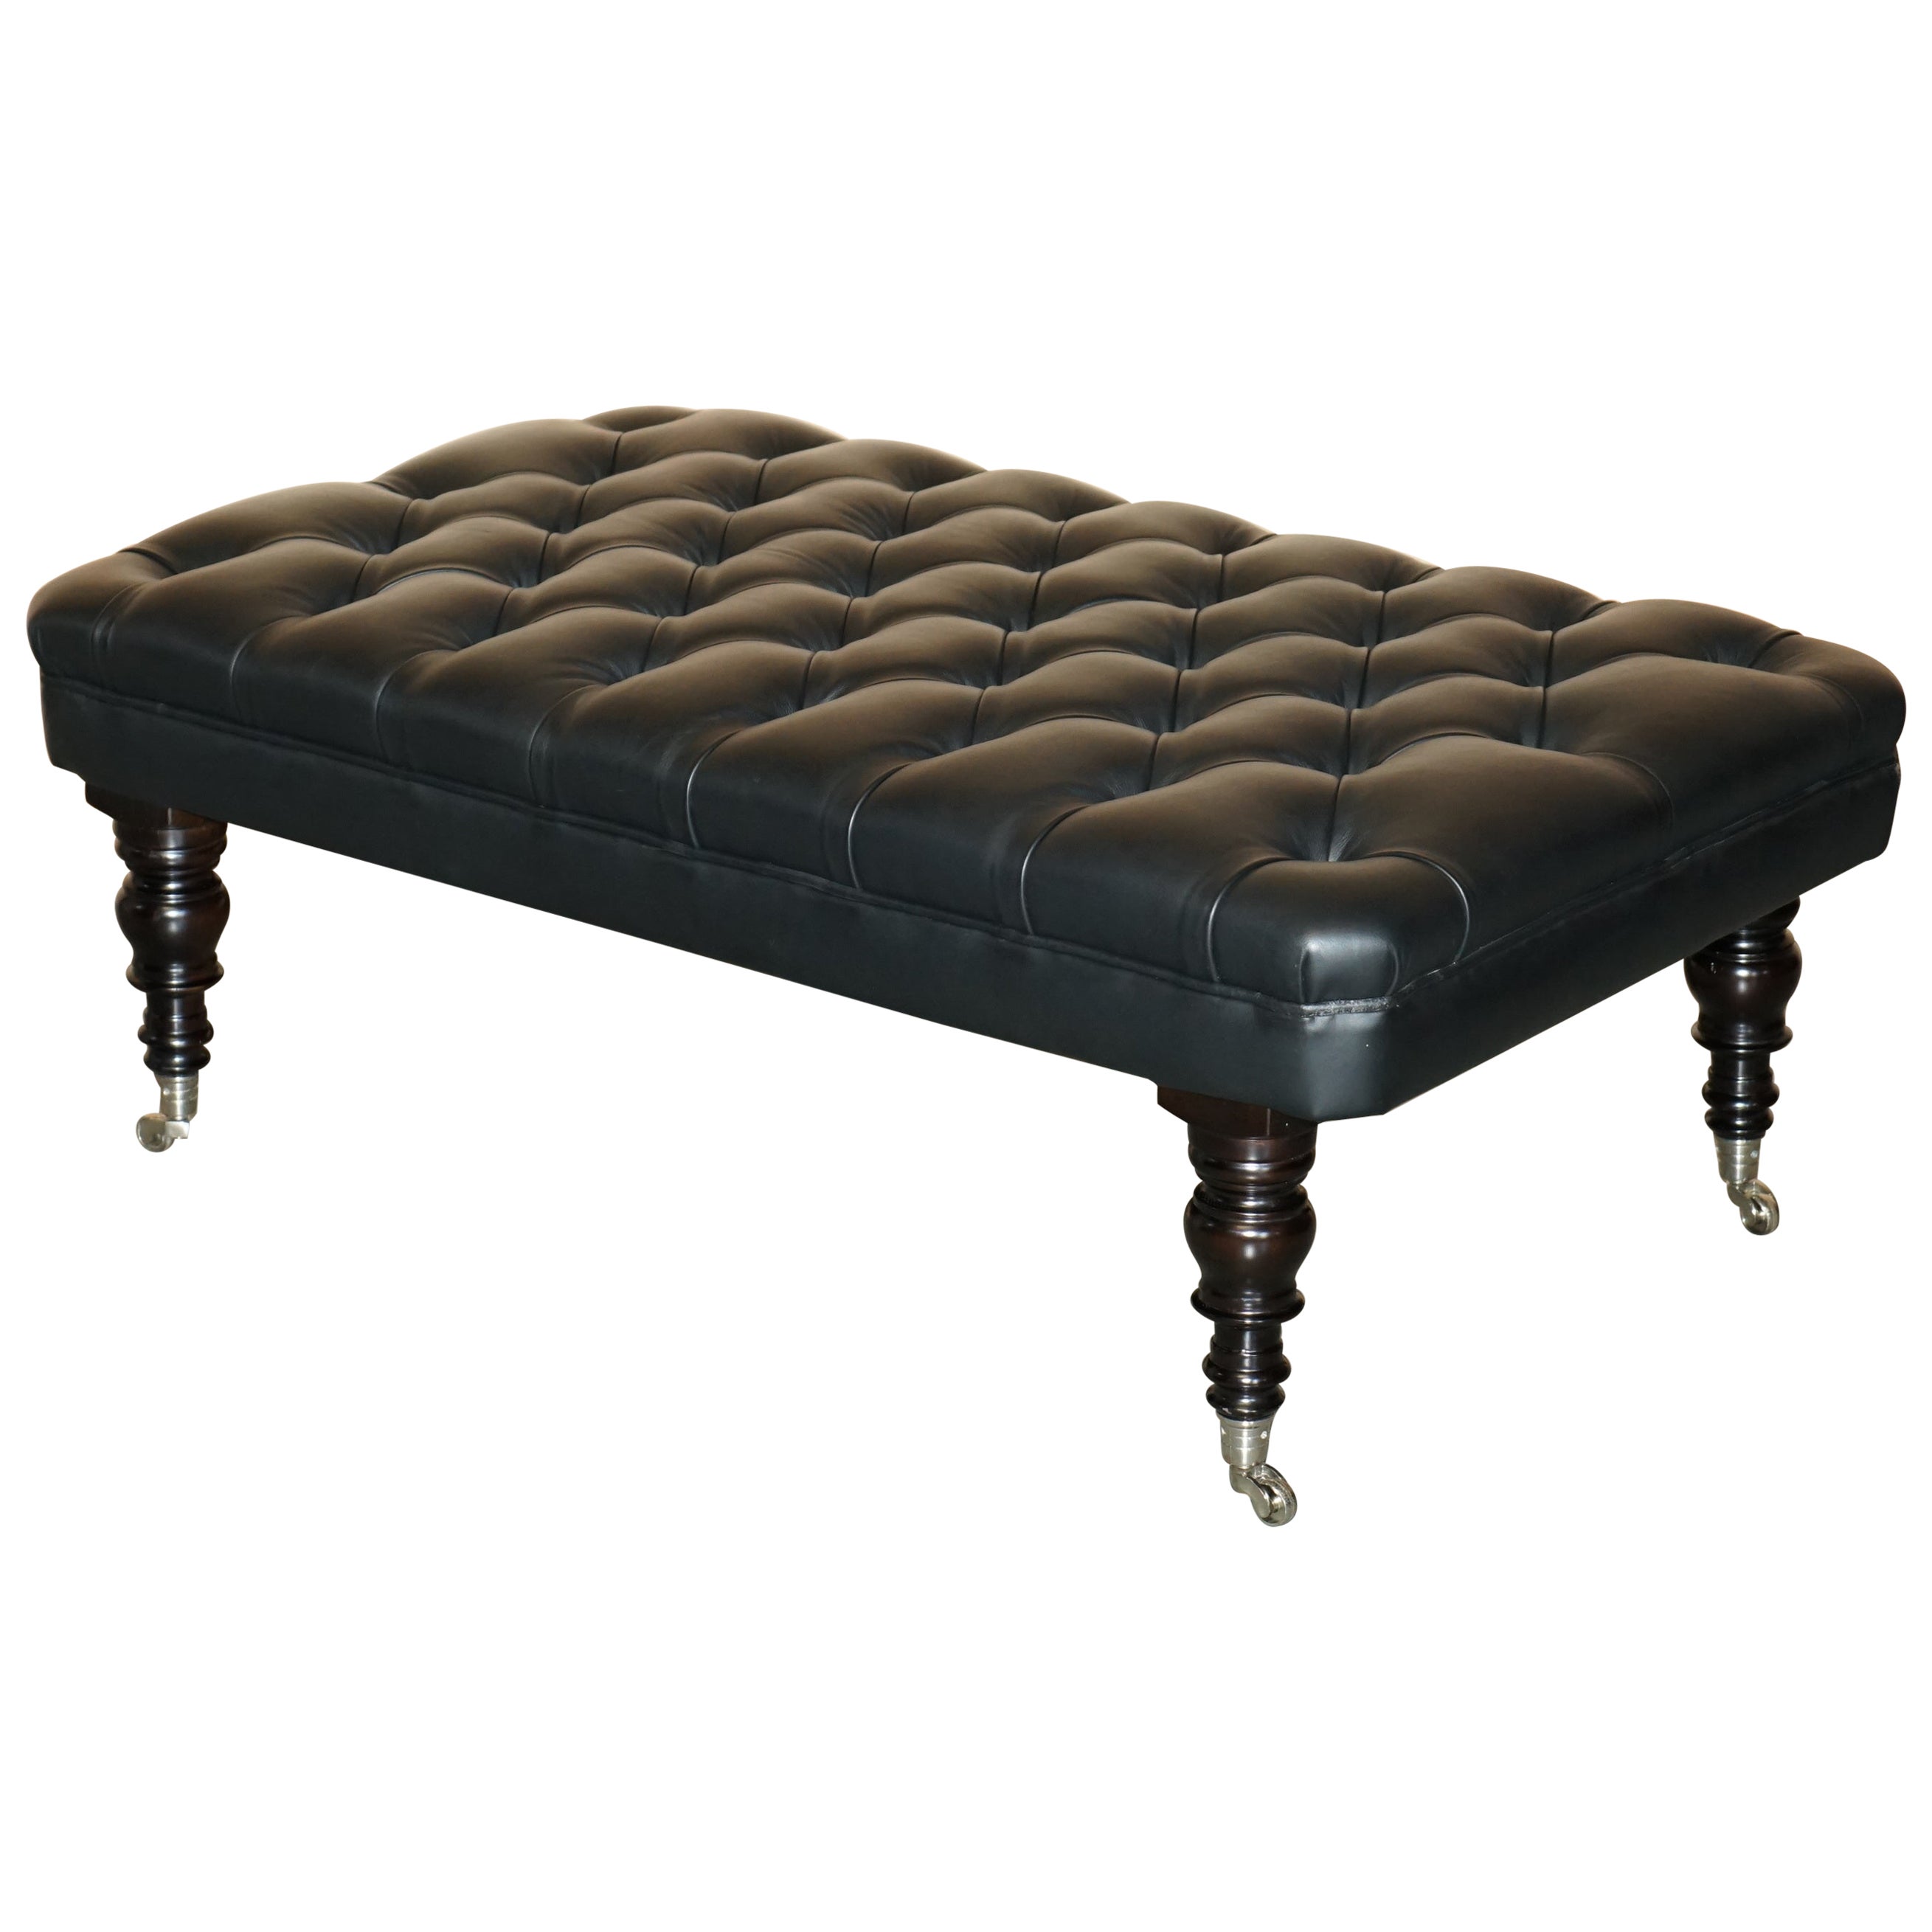 1 von 2 GEORGE SMITH EXTRA LARGE CHESTERFiELD BLACK LEATHER TUFTED FOOTSTOOLS im Angebot